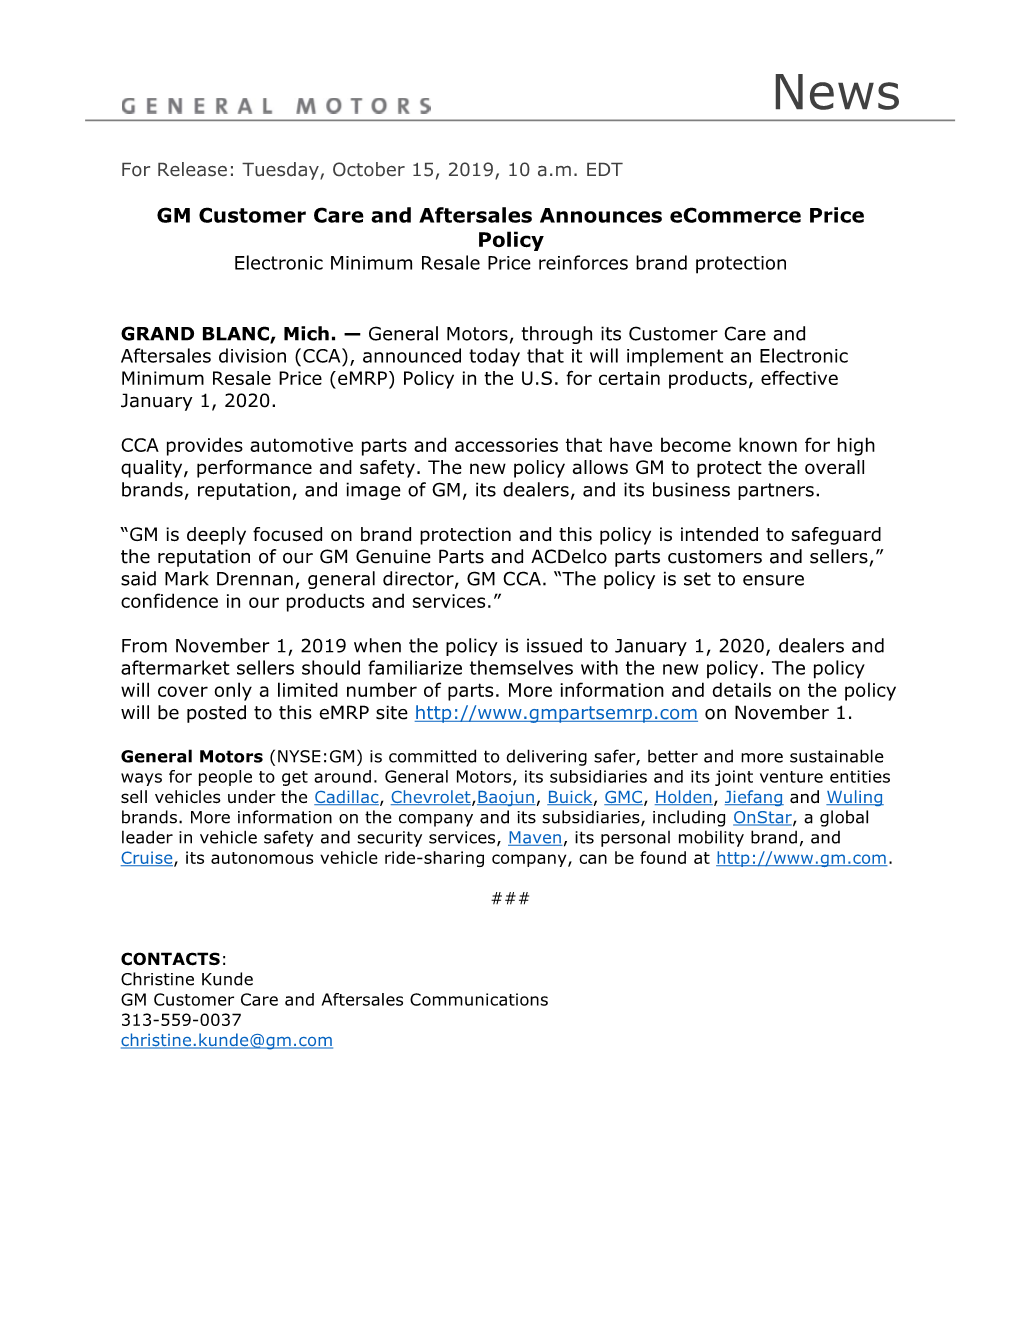 GM Customer Care and Aftersales Announces Ecommerce Price Policy Electronic Minimum Resale Price Reinforces Brand Protection